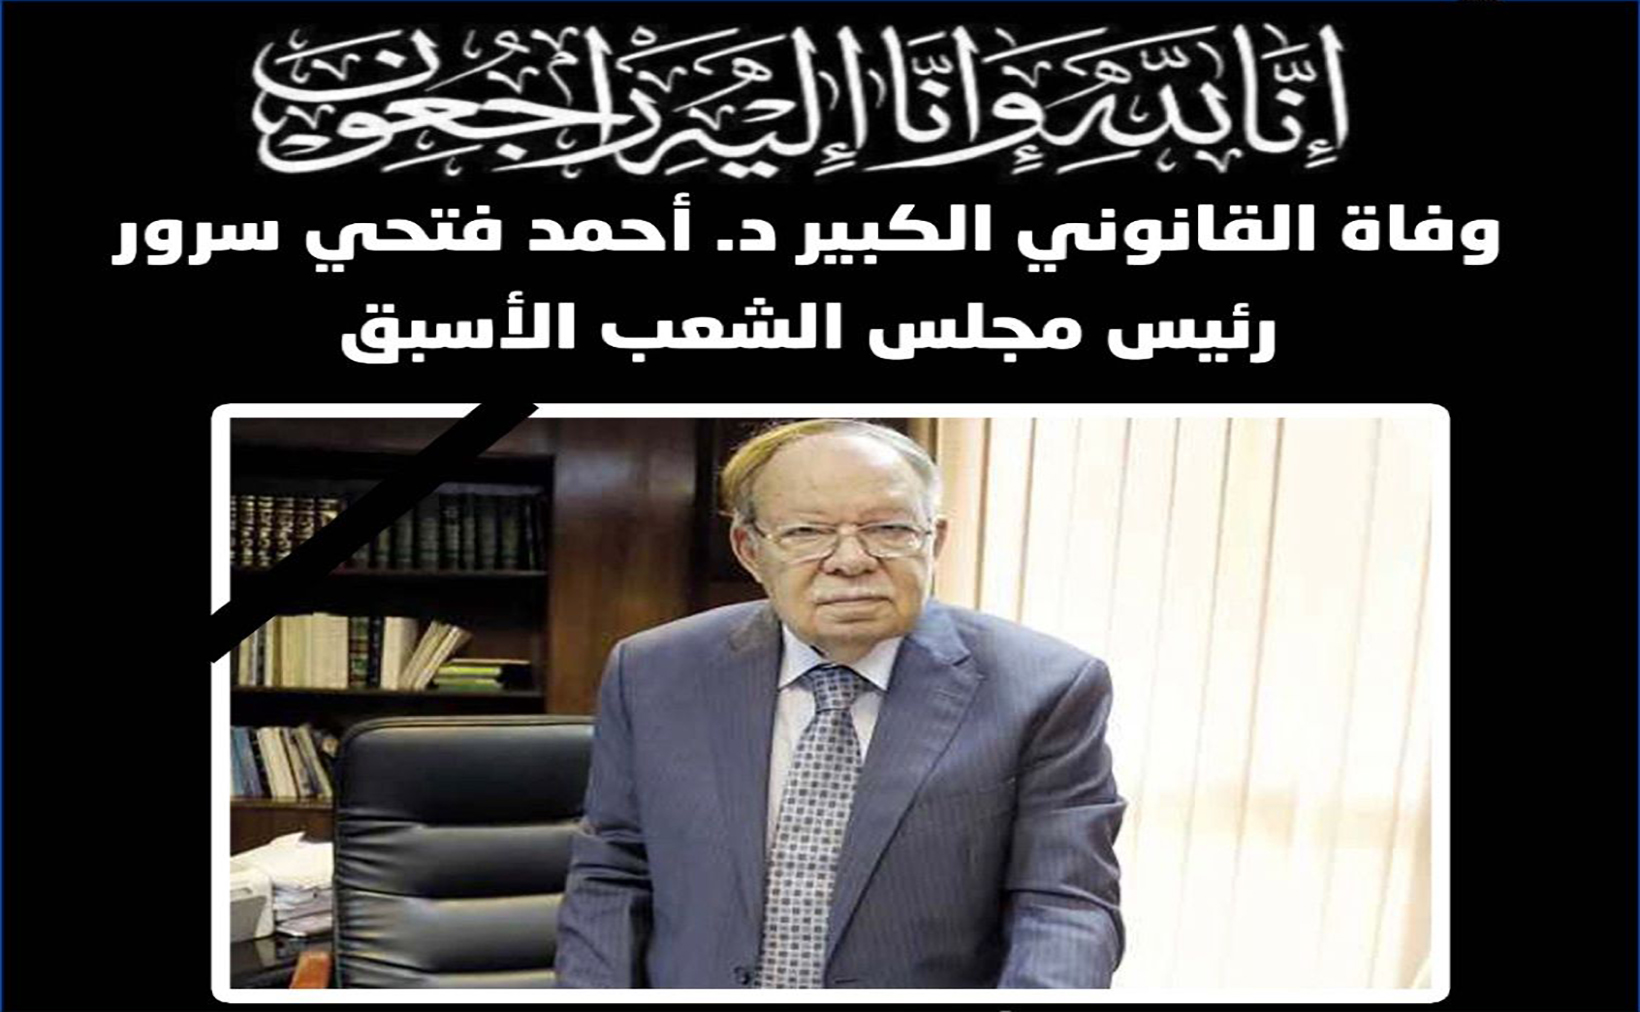 The Secretary General Condoles over the Passing of the Former Speaker of the Egyptian Parliament